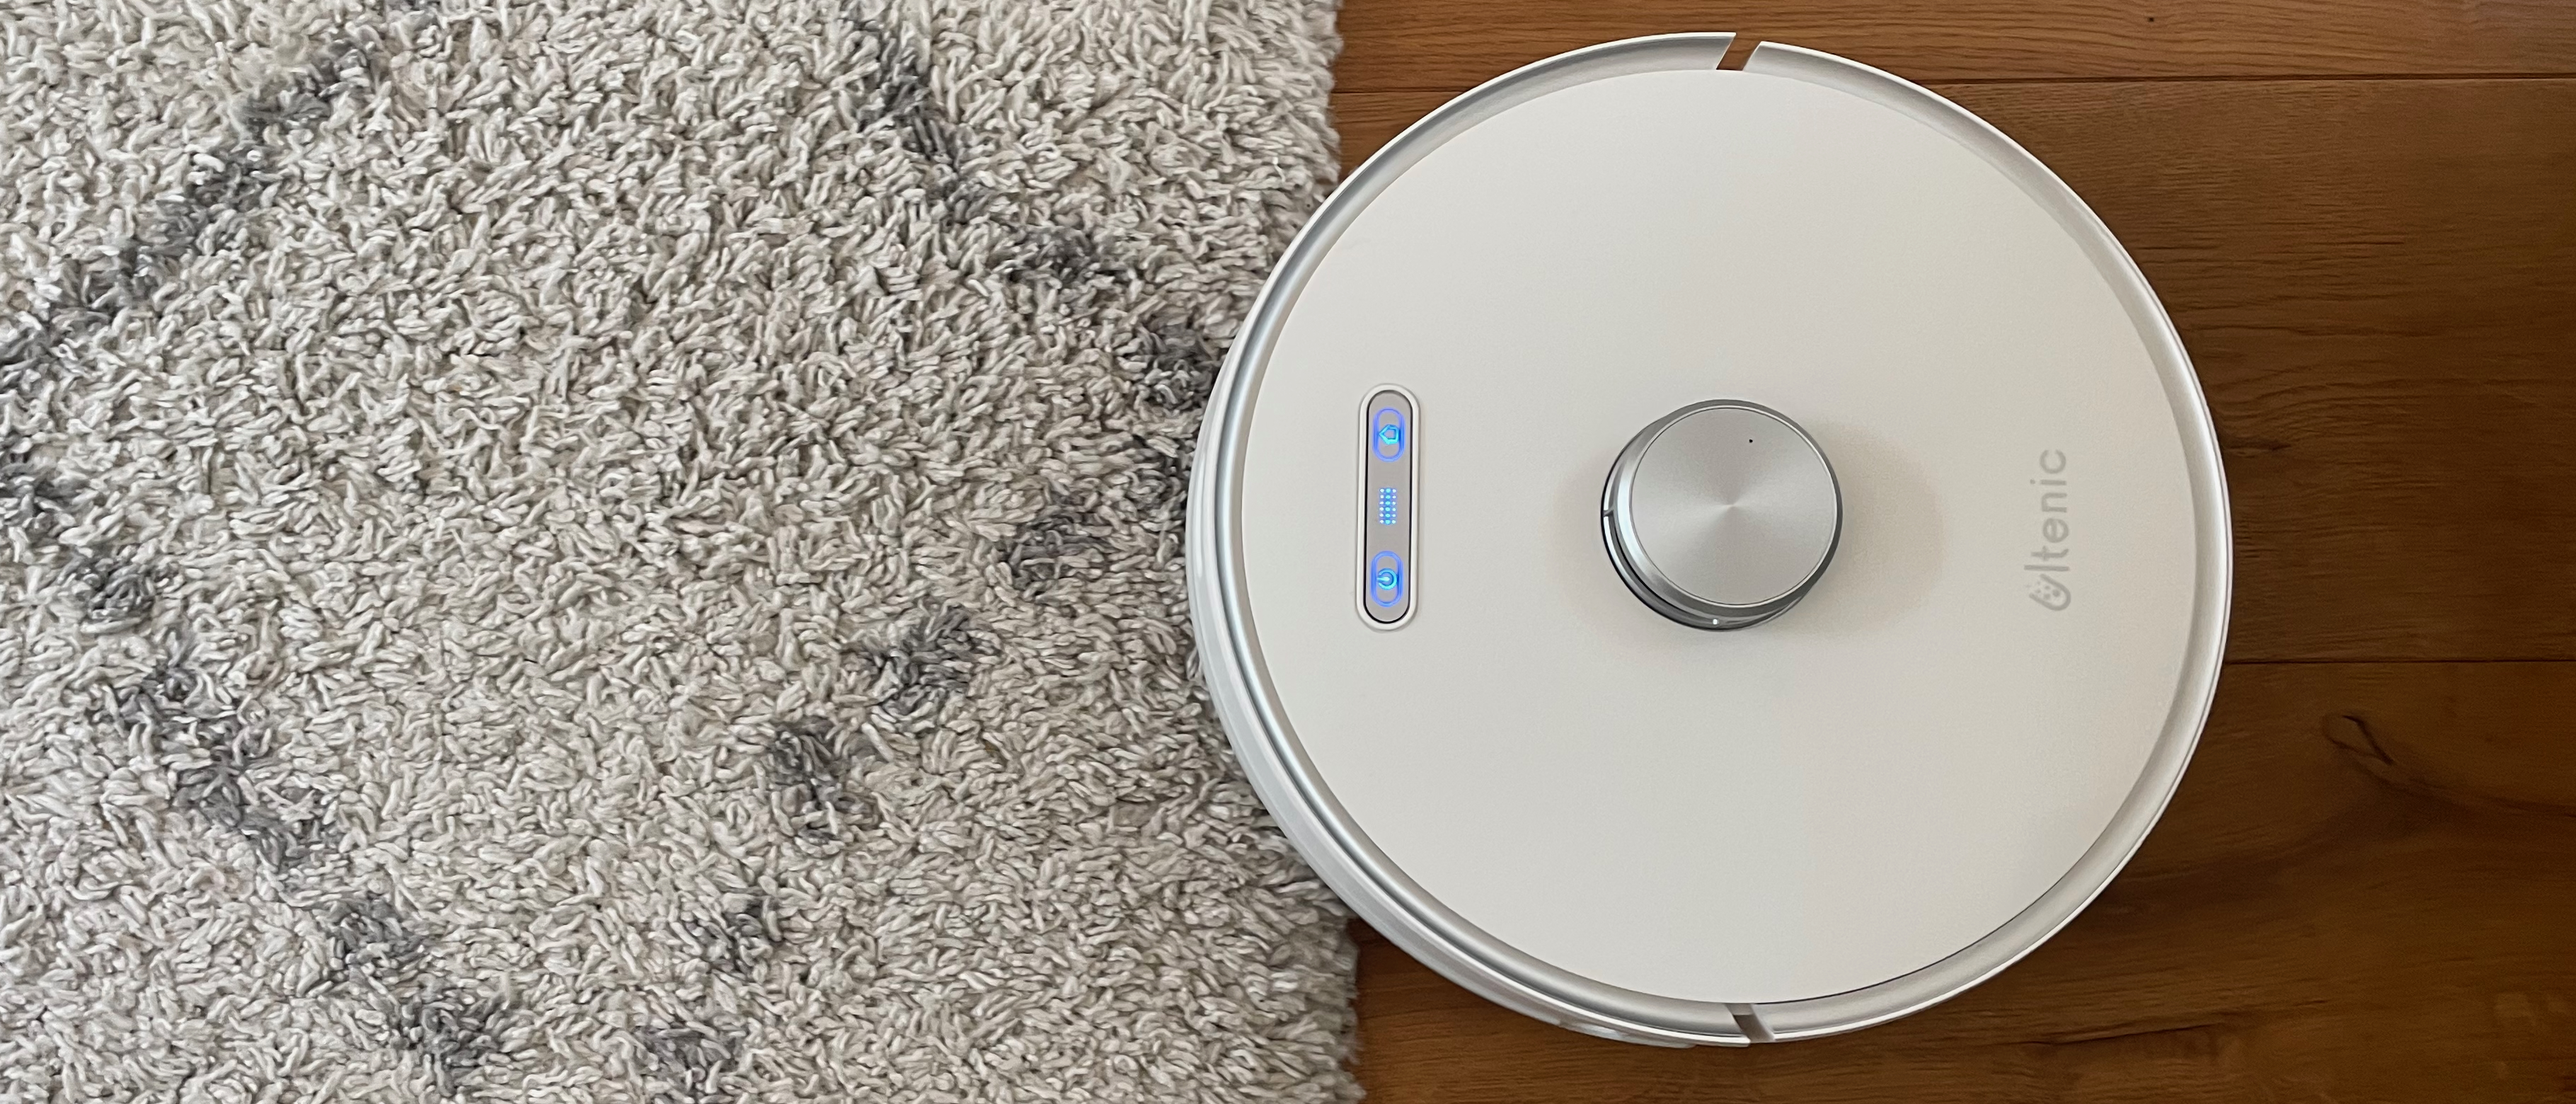 Ultenic T10 review - A self-emptying 2-in-1 smart vacuum robot with mopping  function - CNX Software